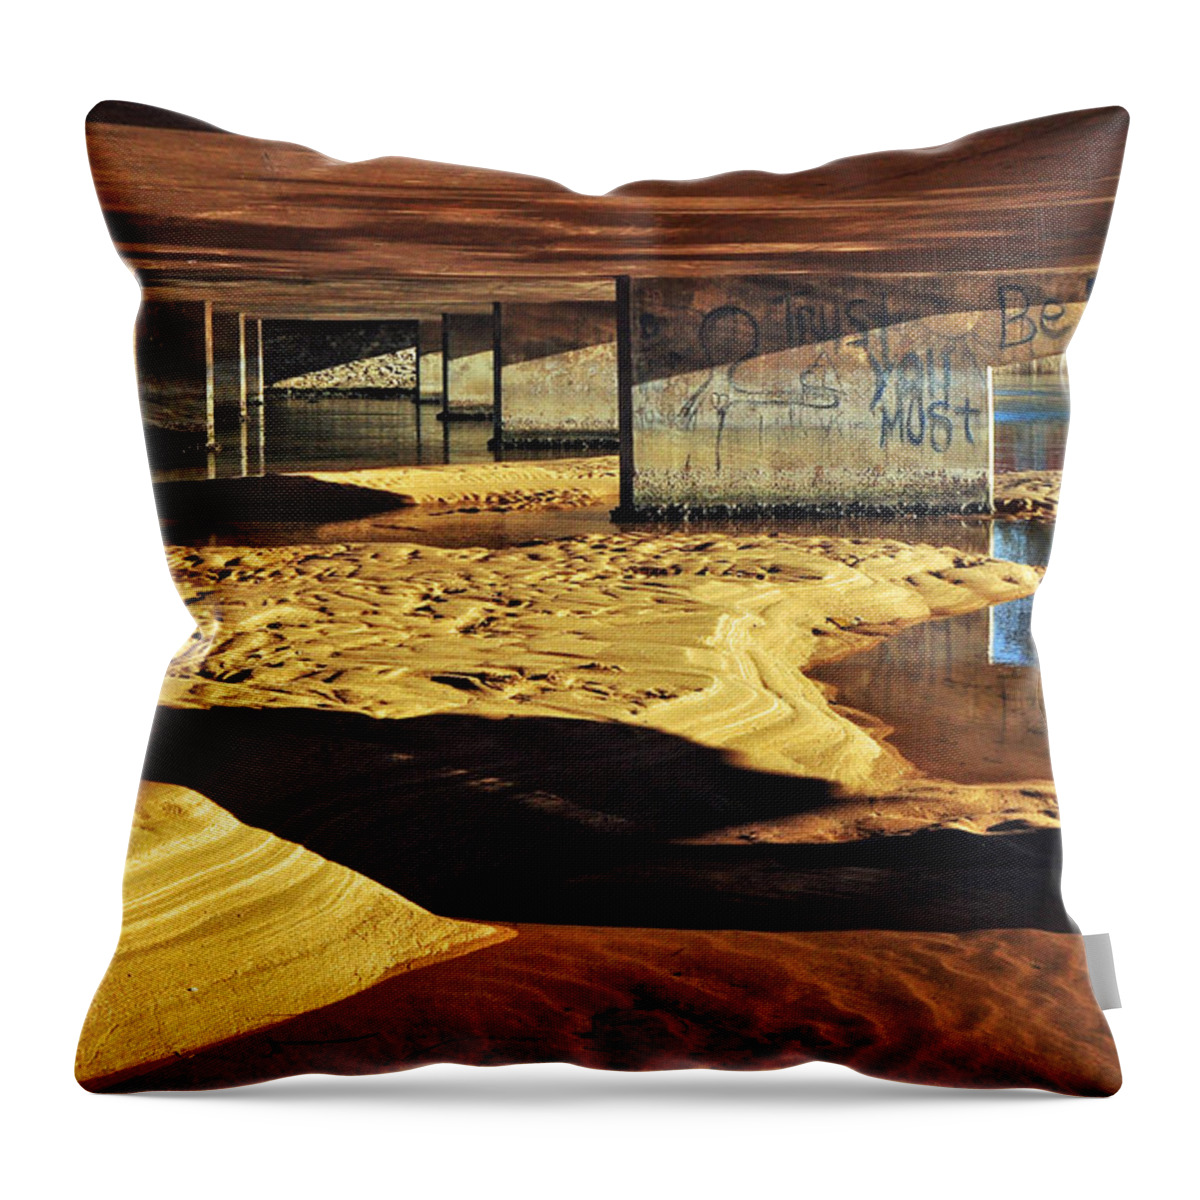 Under The Bridge Throw Pillow featuring the photograph Under the Bridge by Kaye Menner